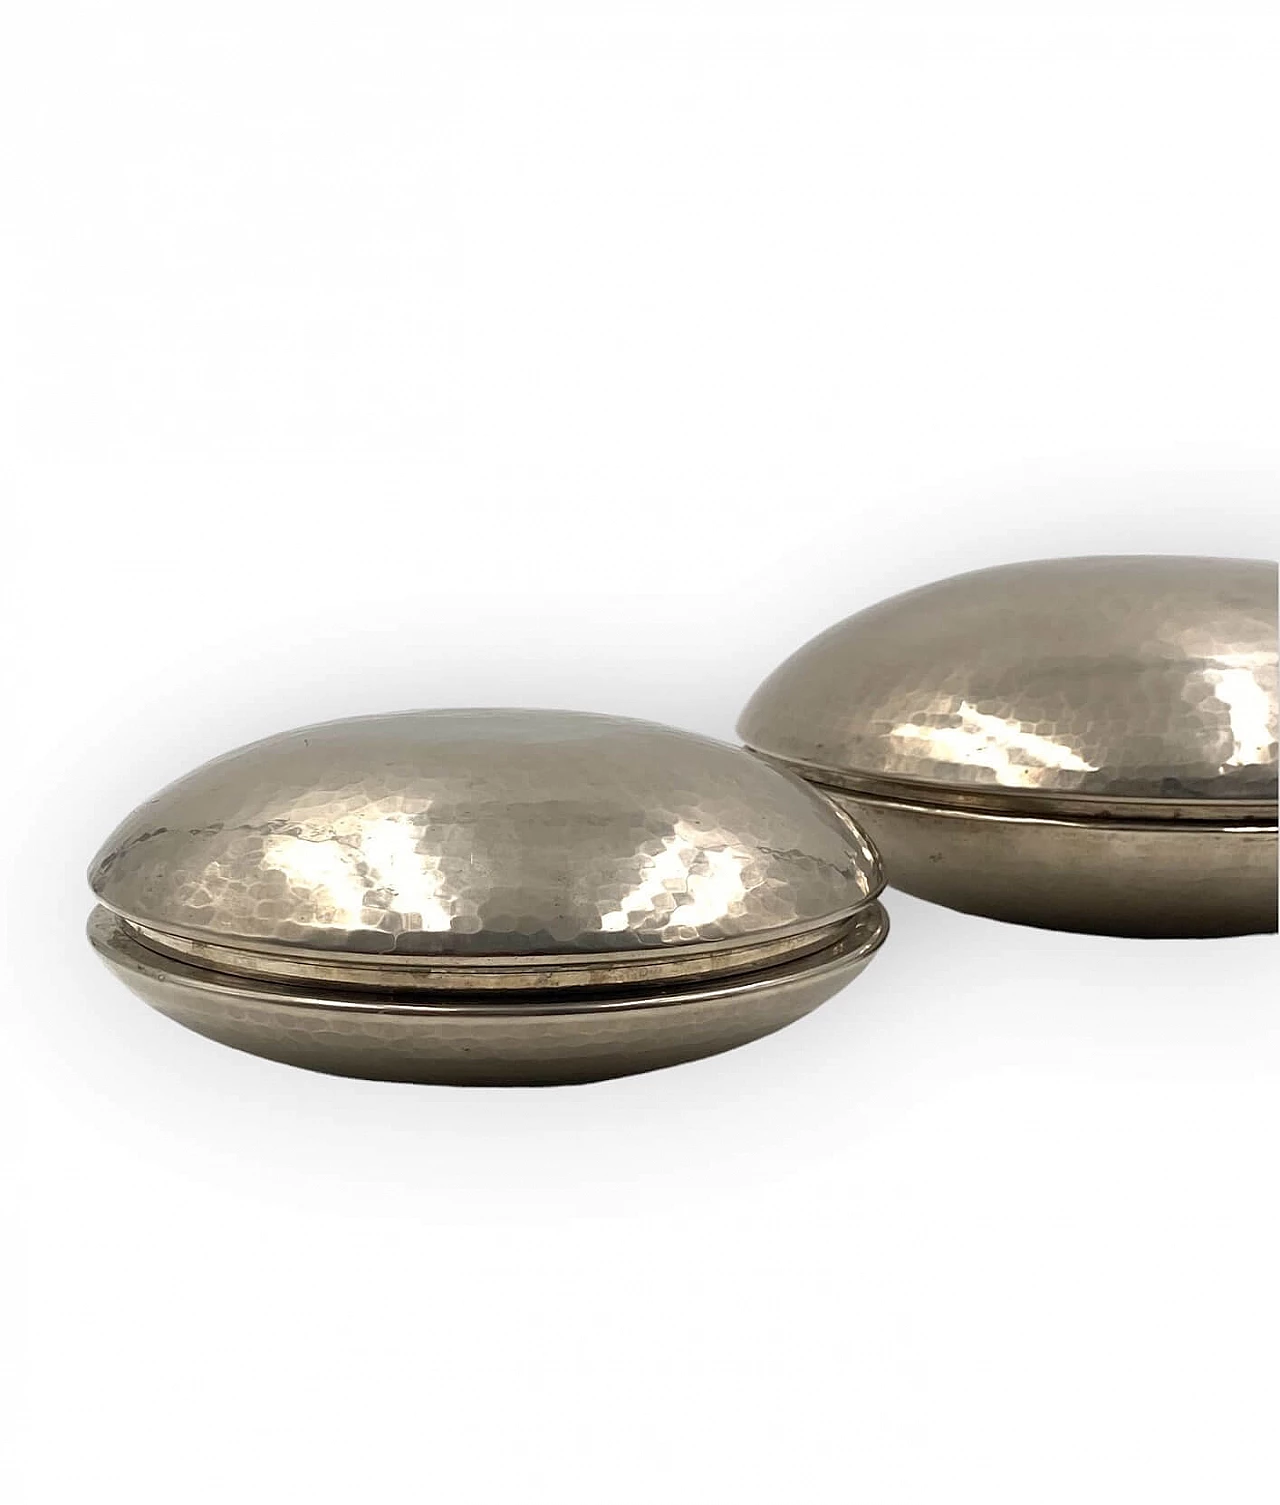 Pair of silver plated object holder by Marino Marini for Laras, 1970s 20